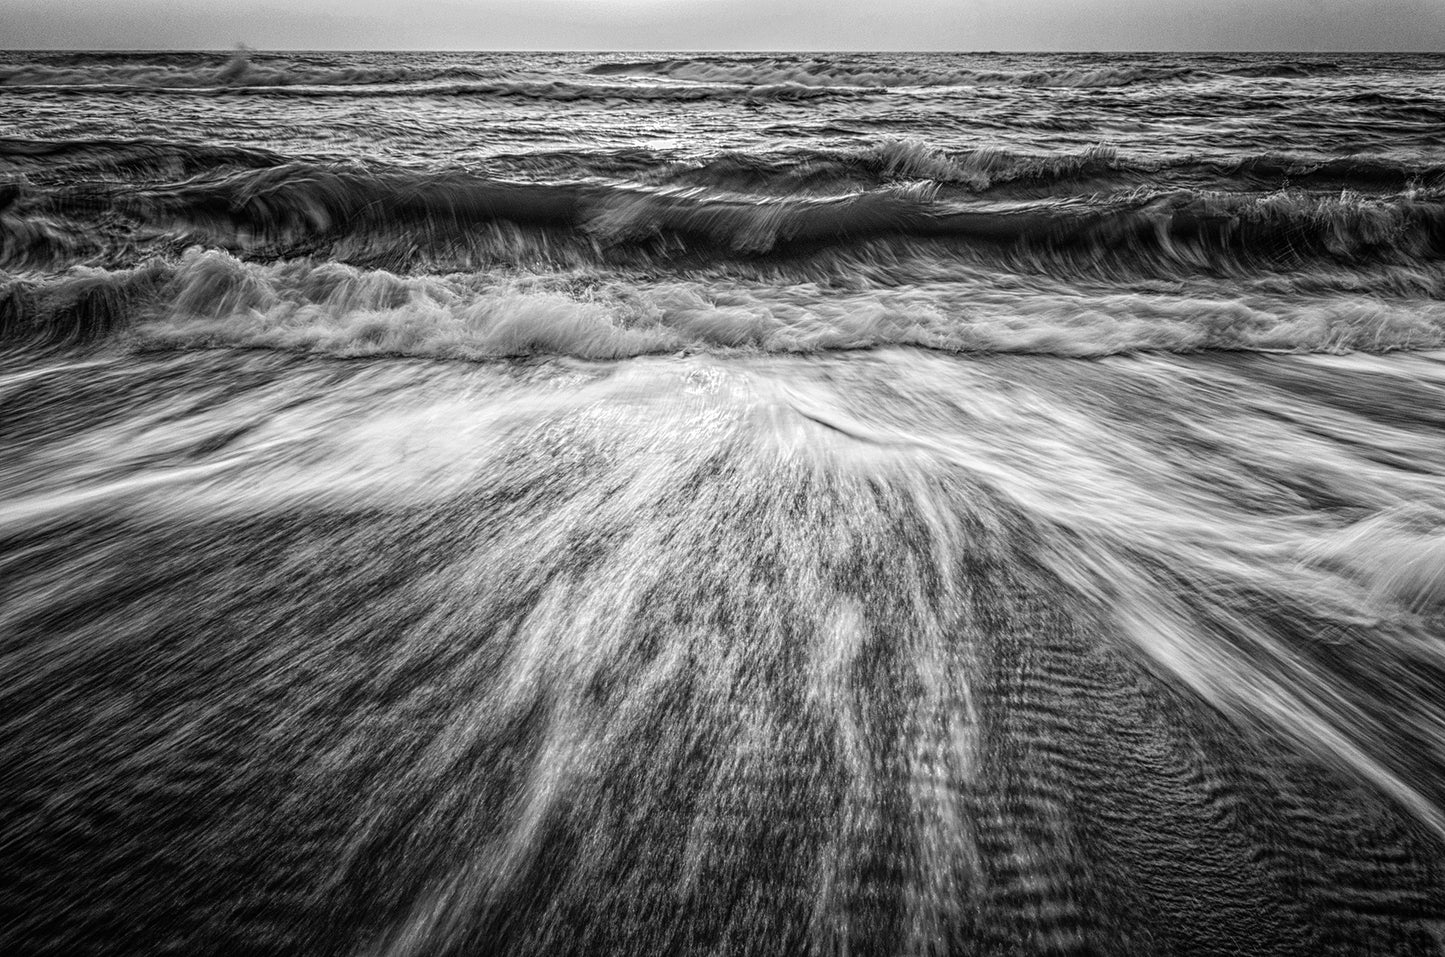 Washing Out to Sea in Black and White Coastal Nature Photo Fine Art Canvas Wall Art Prints  - PIPAFINEART